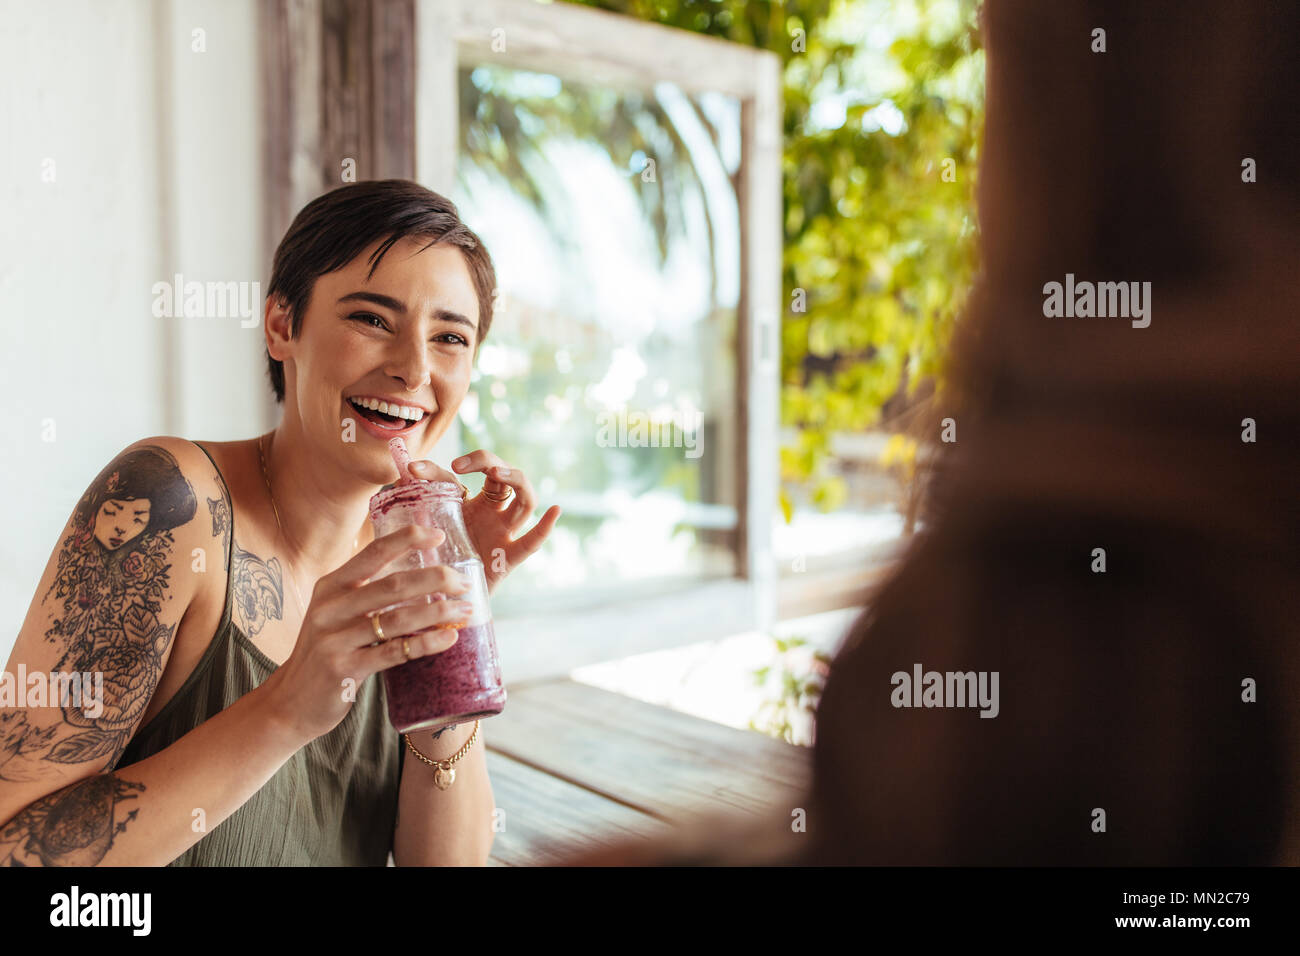 Woman holding a smoothie jar talking to her friend at a restaurant. Woman with tattoo on hand at a restaurant drinking juice. Stock Photo